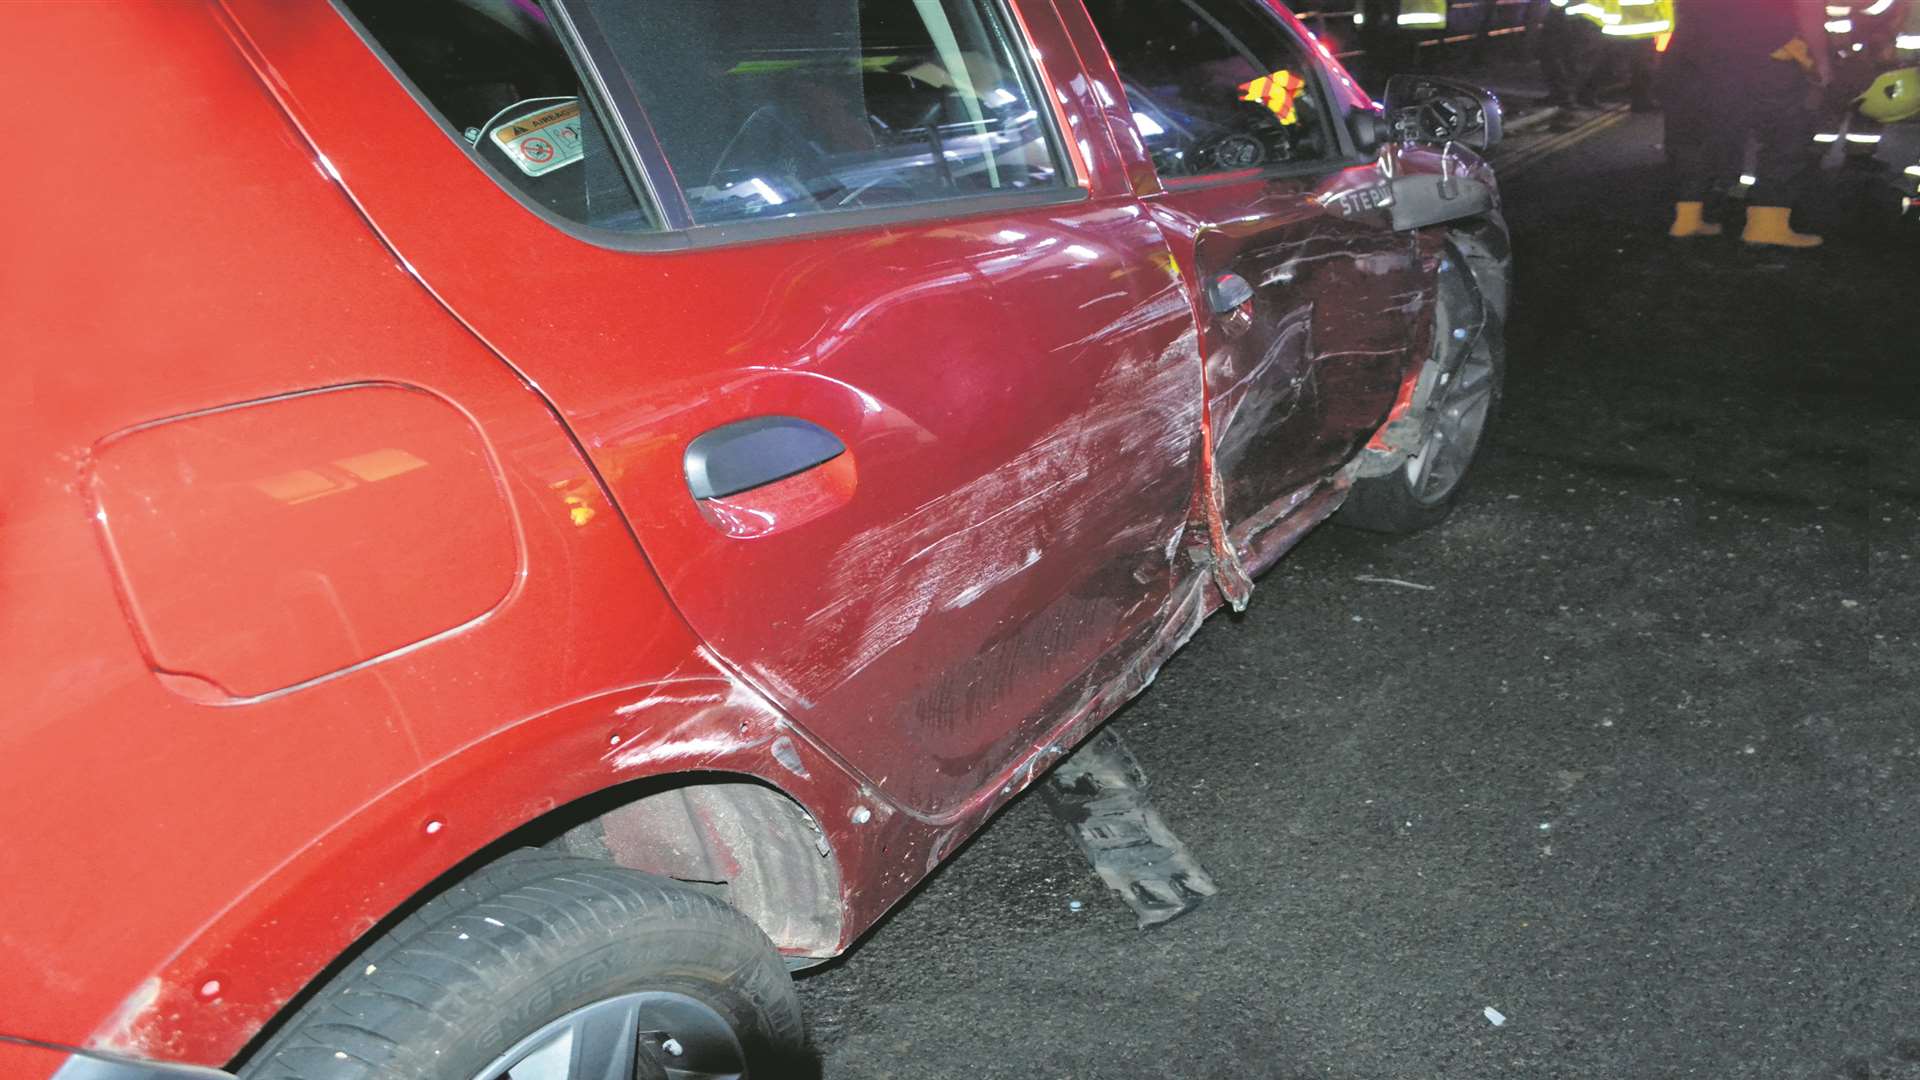 Simon Leith has called for safety improvements after his wife's car was hit